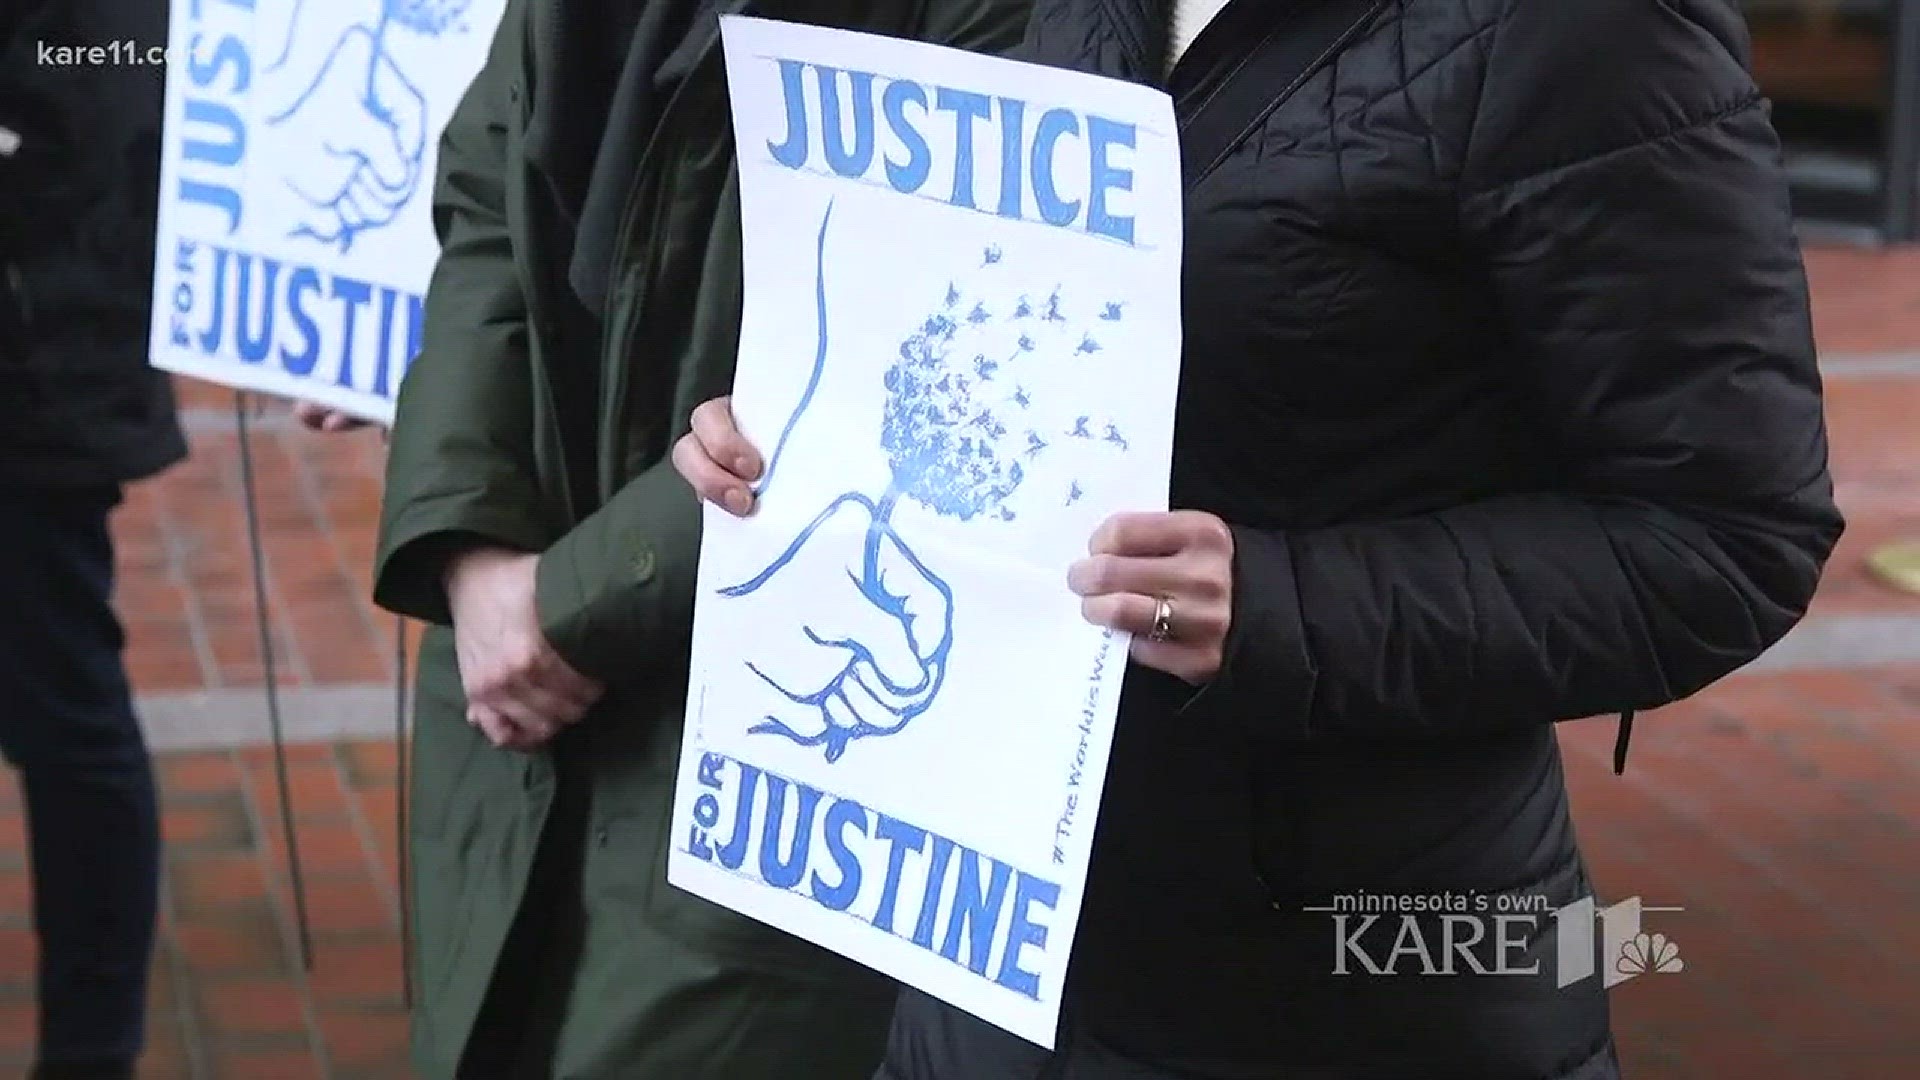 Several people gathered at the Hennepin County Courthouse Tuesday to rally for a decision on possible charges in the shooting death of Justine Damond.